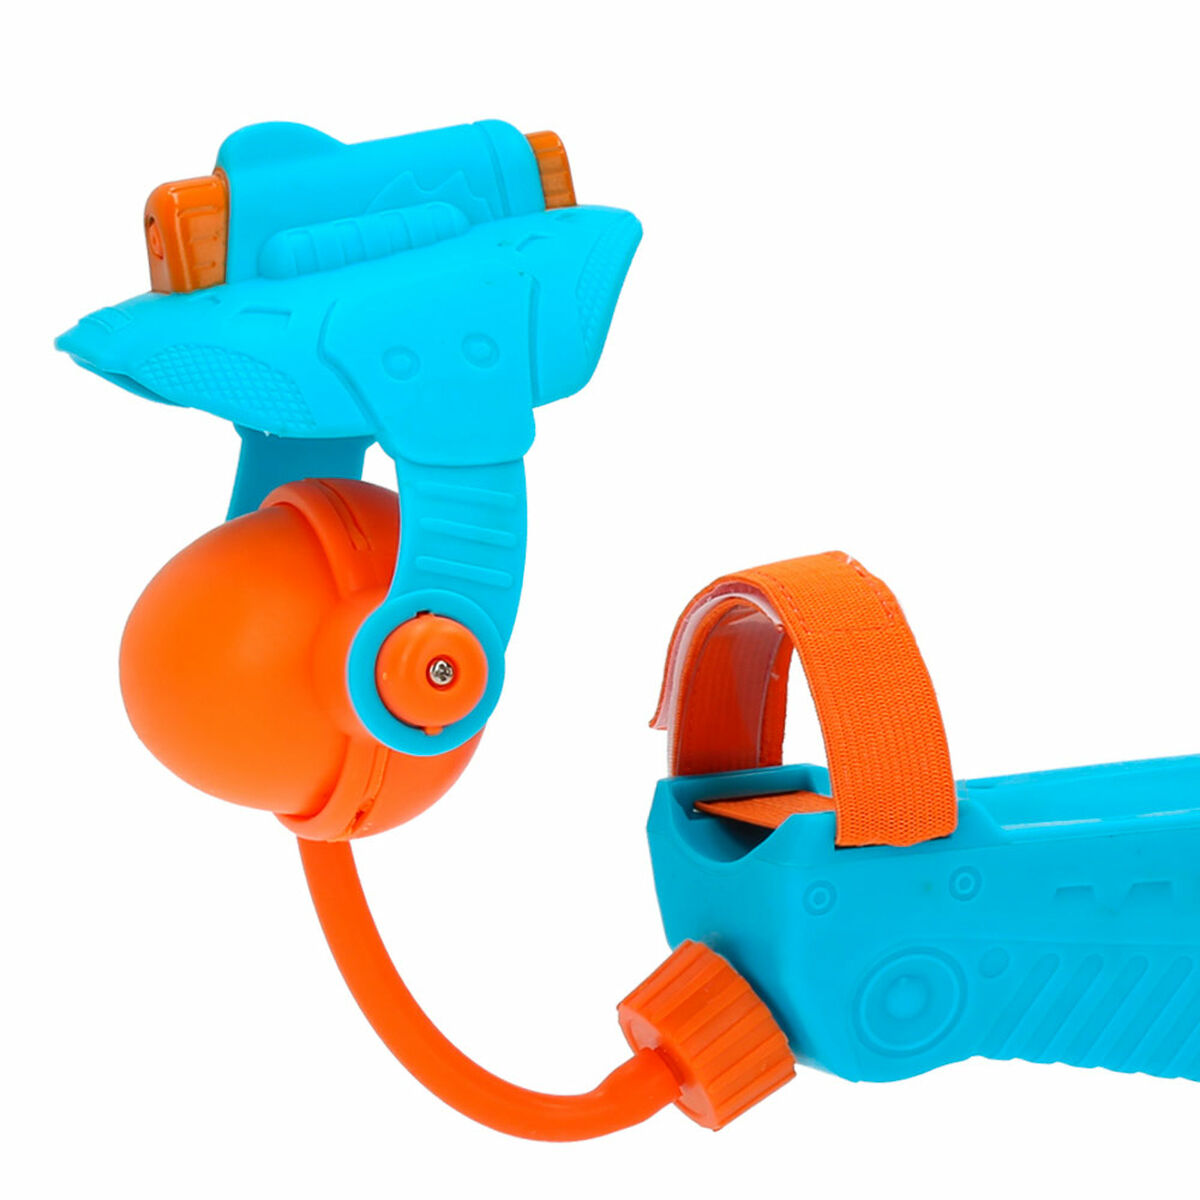 Water Pistol Eolo HYDRO CHARGER Blue 37,5 x 8,5 x 11 cm (6 Units)